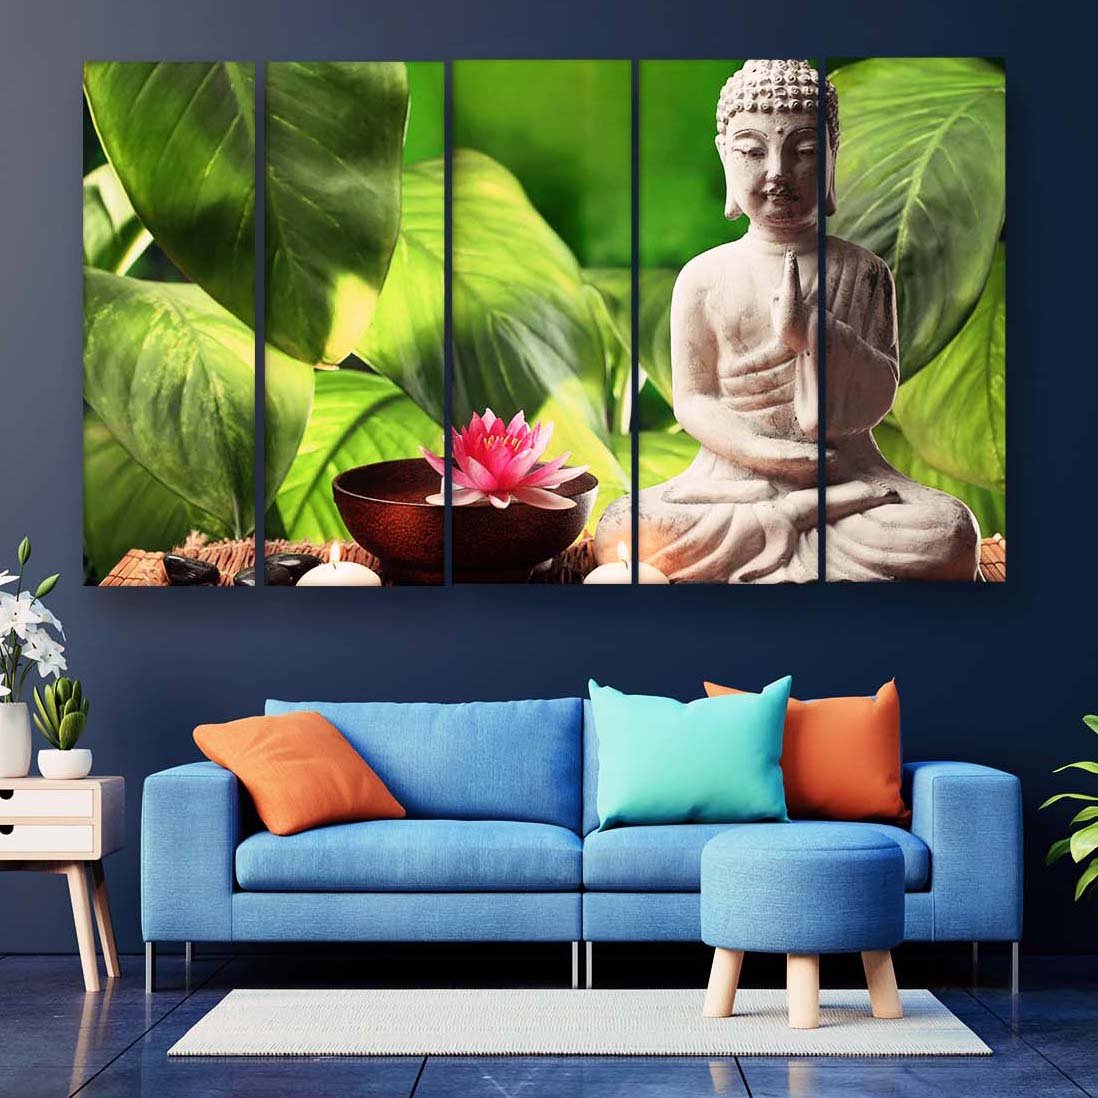 Casperme Buddha Wall Painting For Living Room for Bedroom, Hotels & Office Decoration (48×30 inhes)